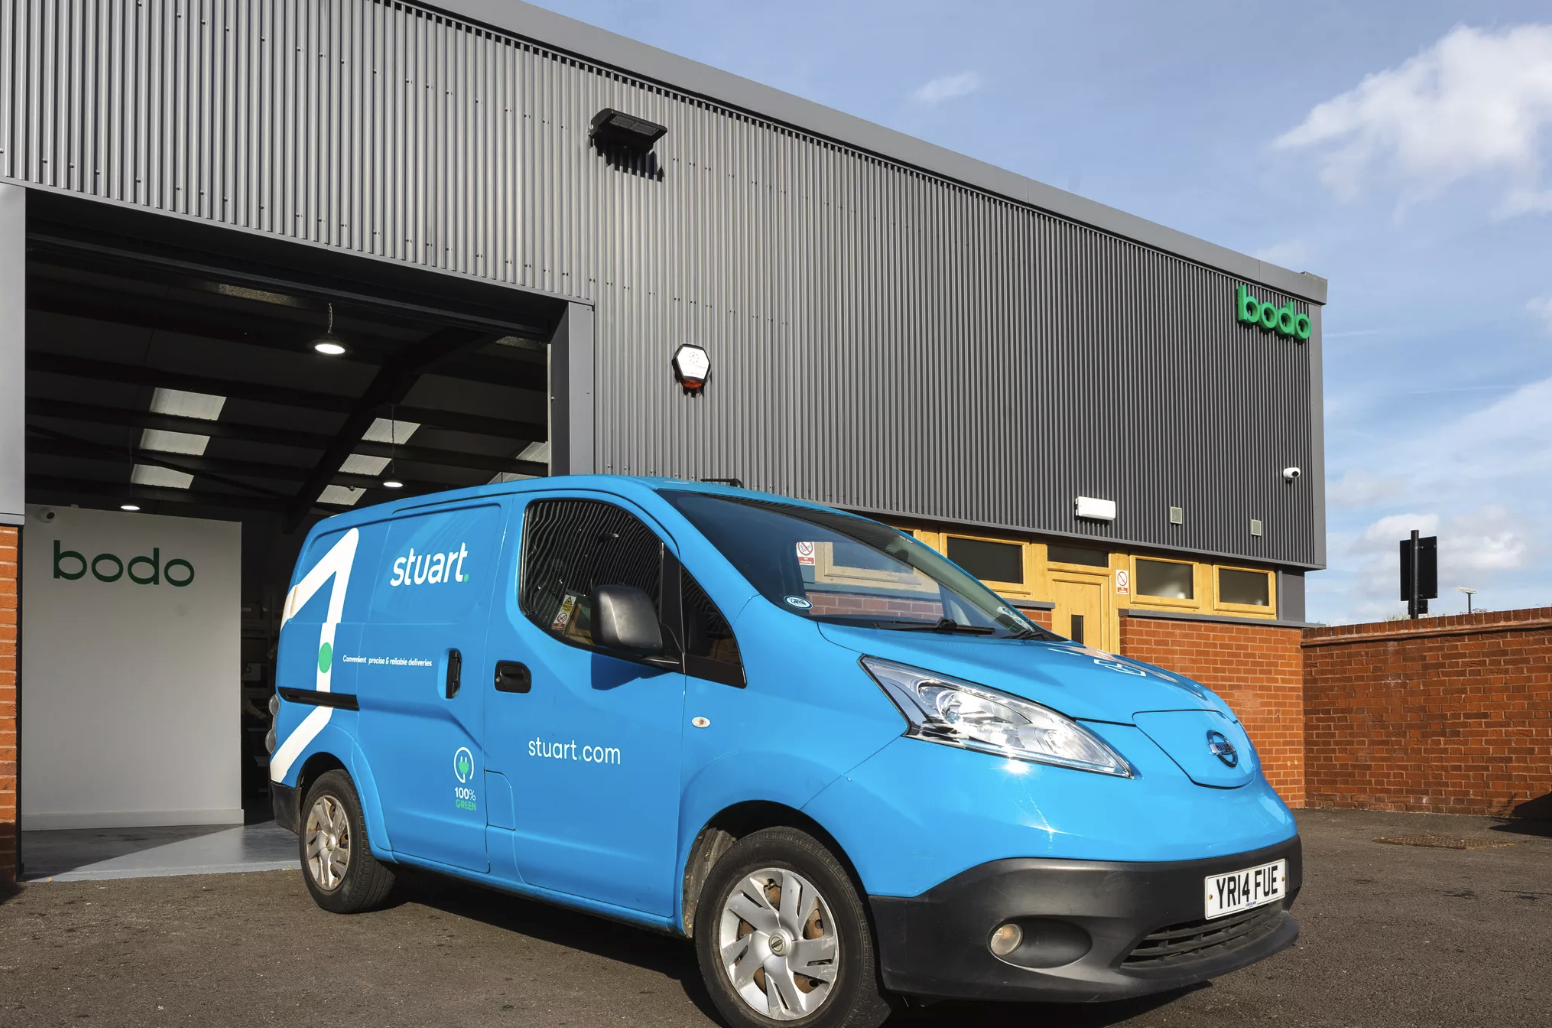 Stuart partners with Bodo to provide sustainable deliveries across London